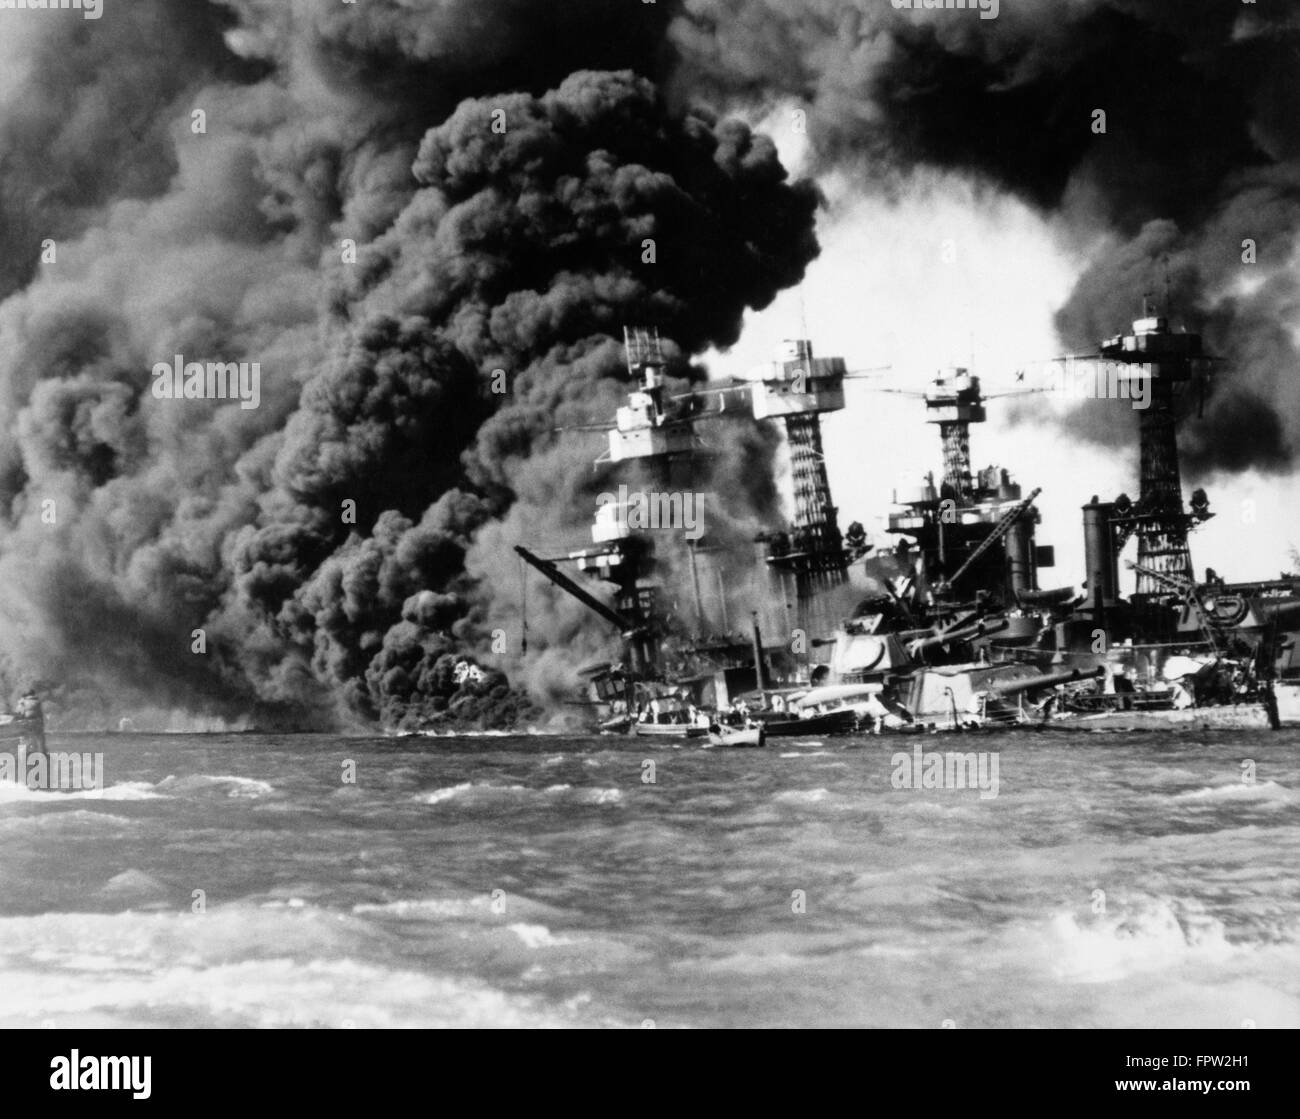 1940s DECEMBER 7 1941 BURNING NAVY SHIPS IN PEARL HARBOR AFTER SURPRISE ATTACK BY JAPANESE Stock Photo